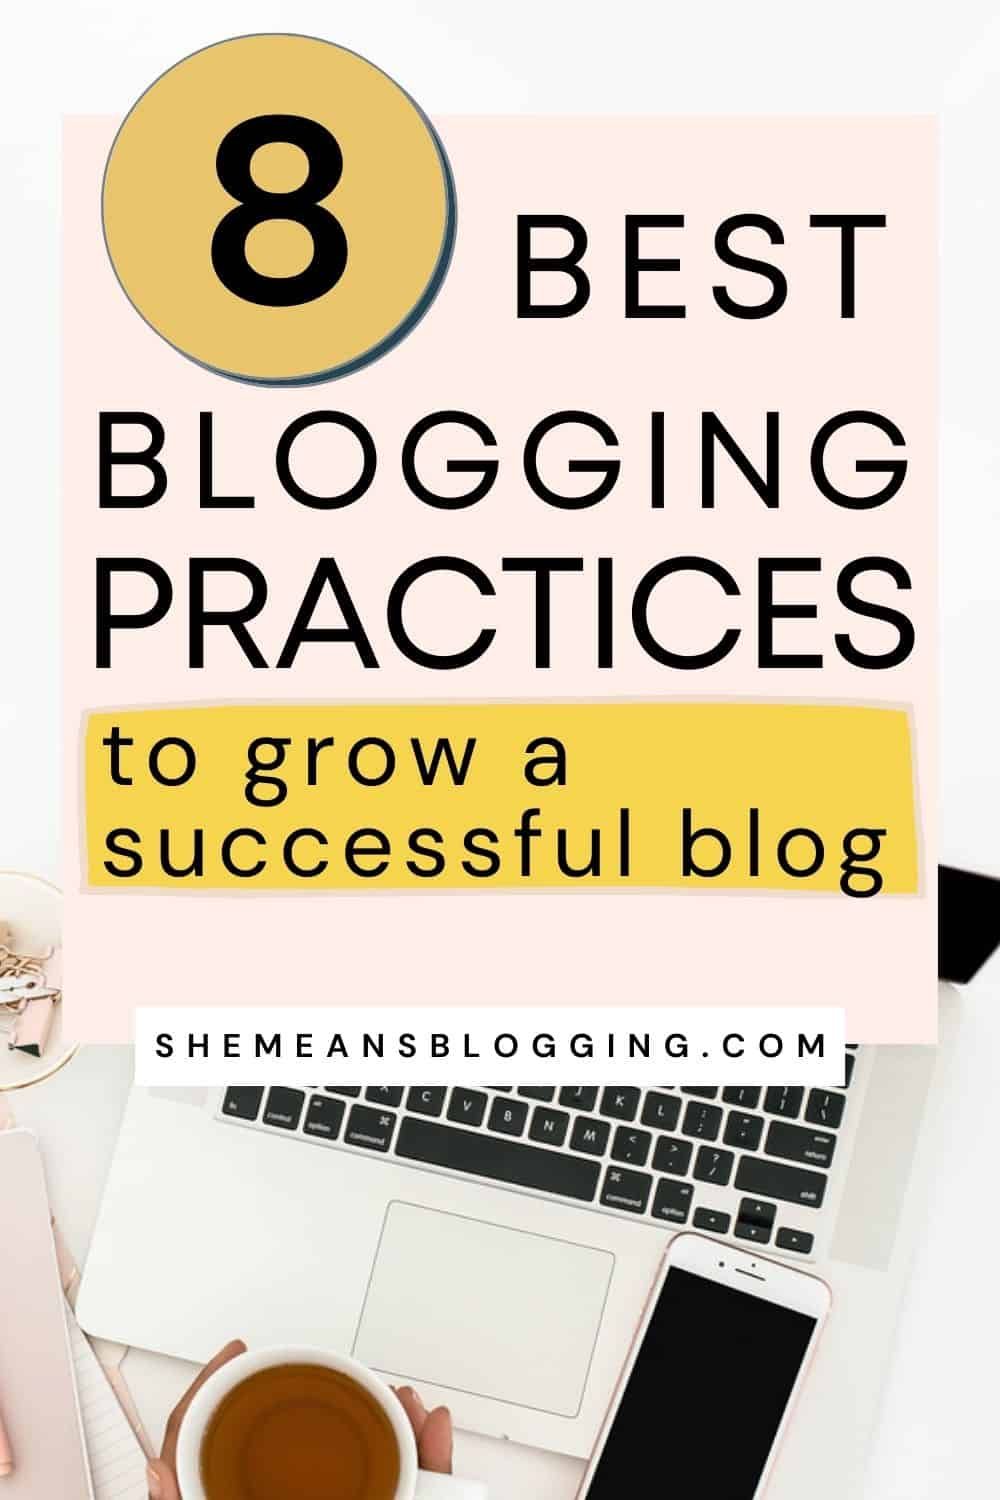 The best blogging practices for successful blogging! How to grow a successful blog? Follow these best practices for blogging today and grow your blog. Best beginner blogging tips for bloggers to follow.